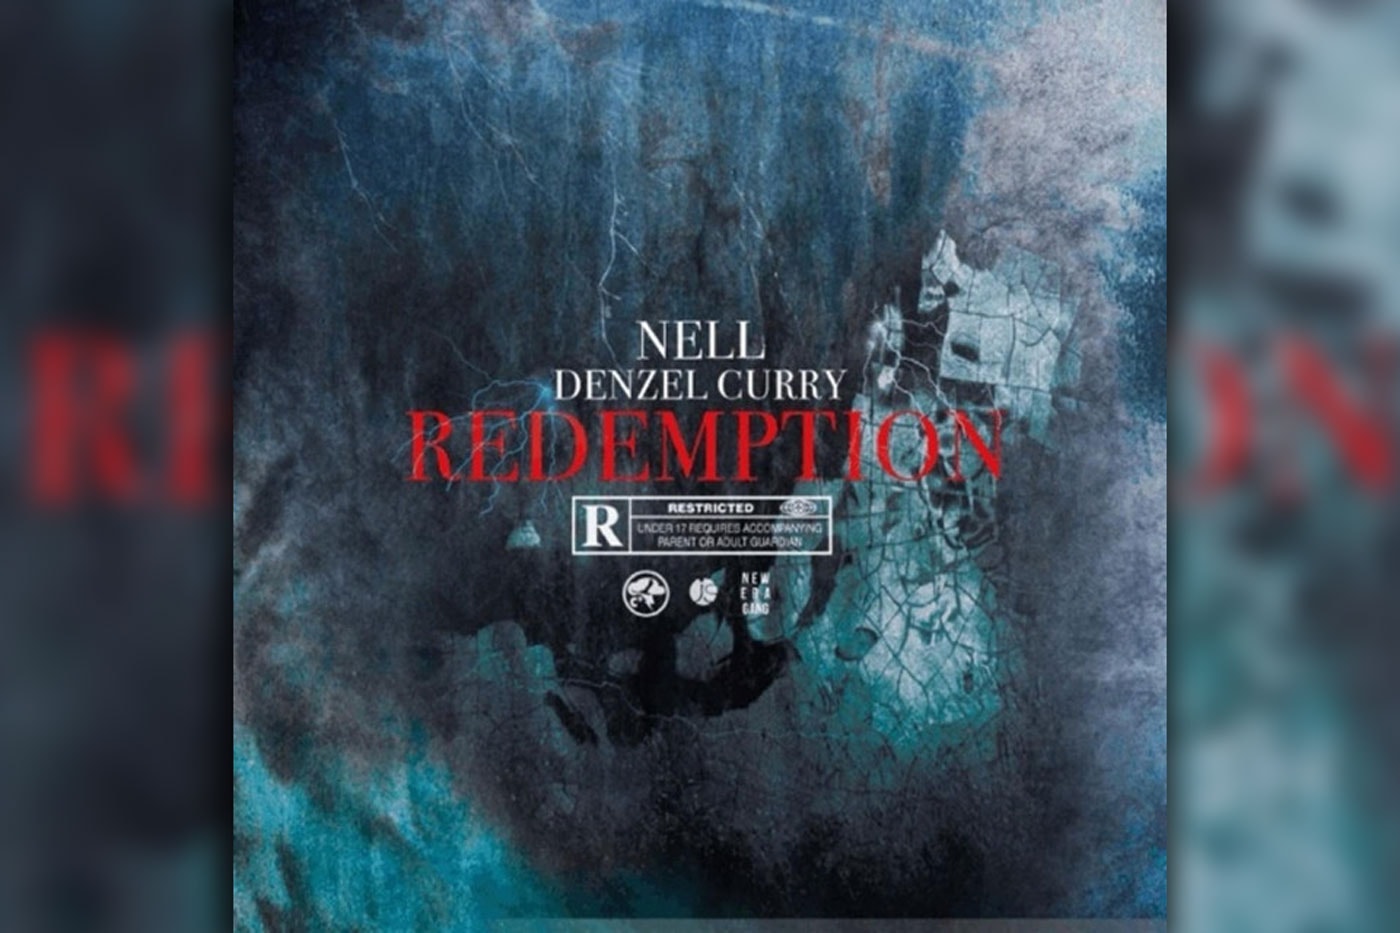 Nell & Denzel Curry Connect on New Single, "Redemption"